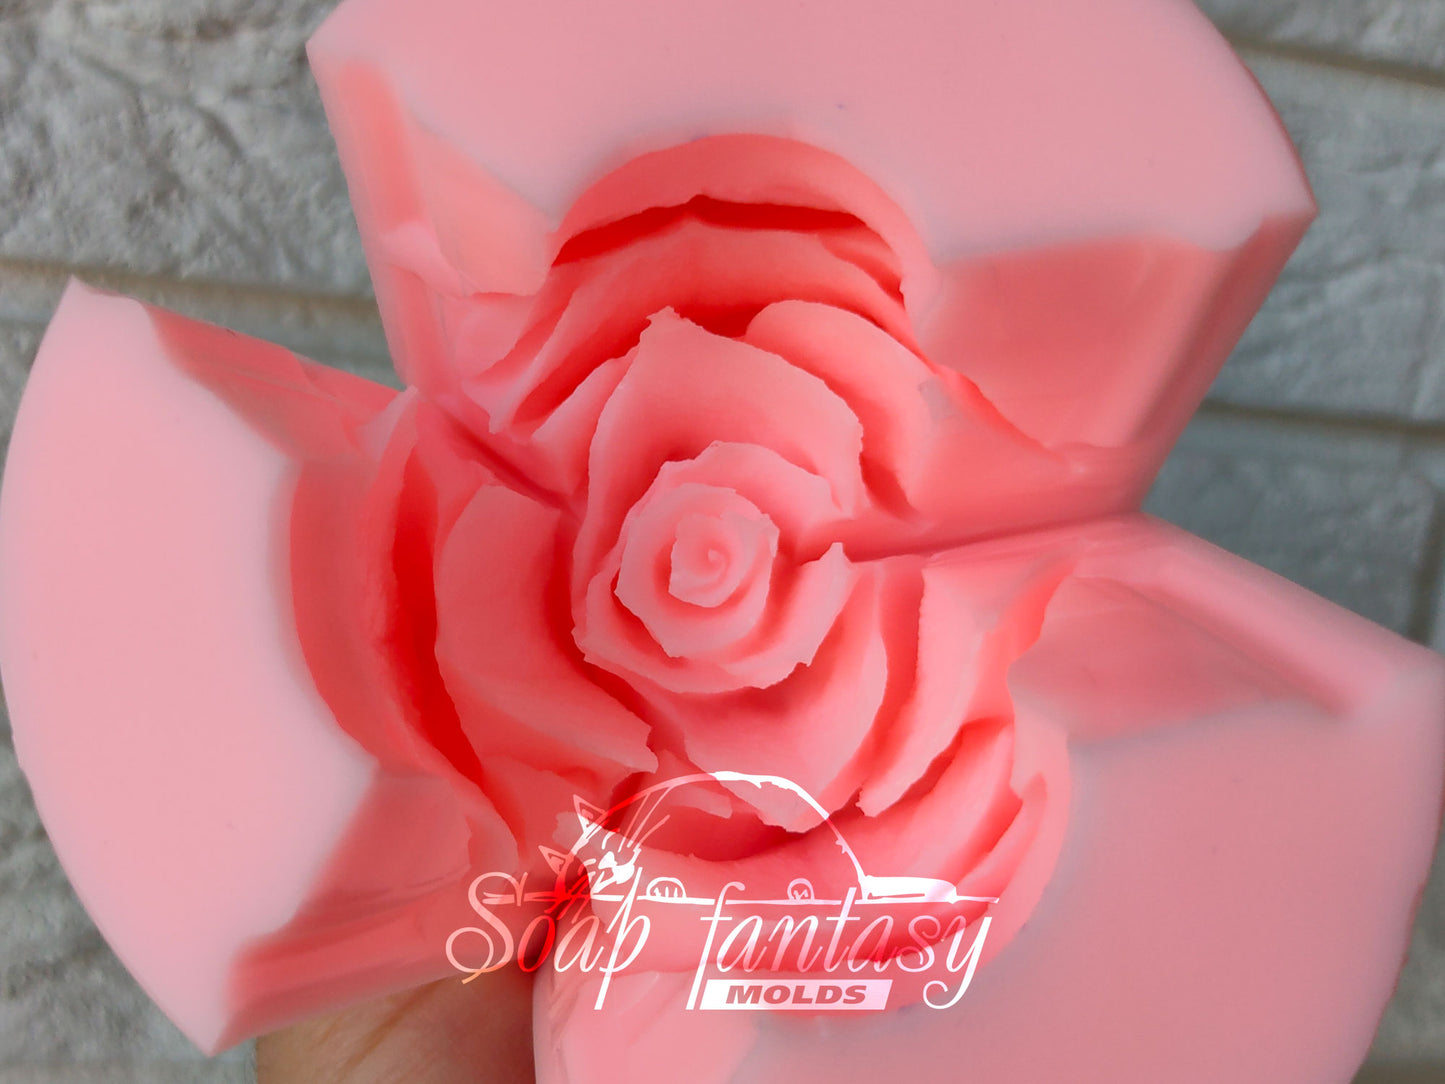 Rose "Monica" silicone mold for soap making